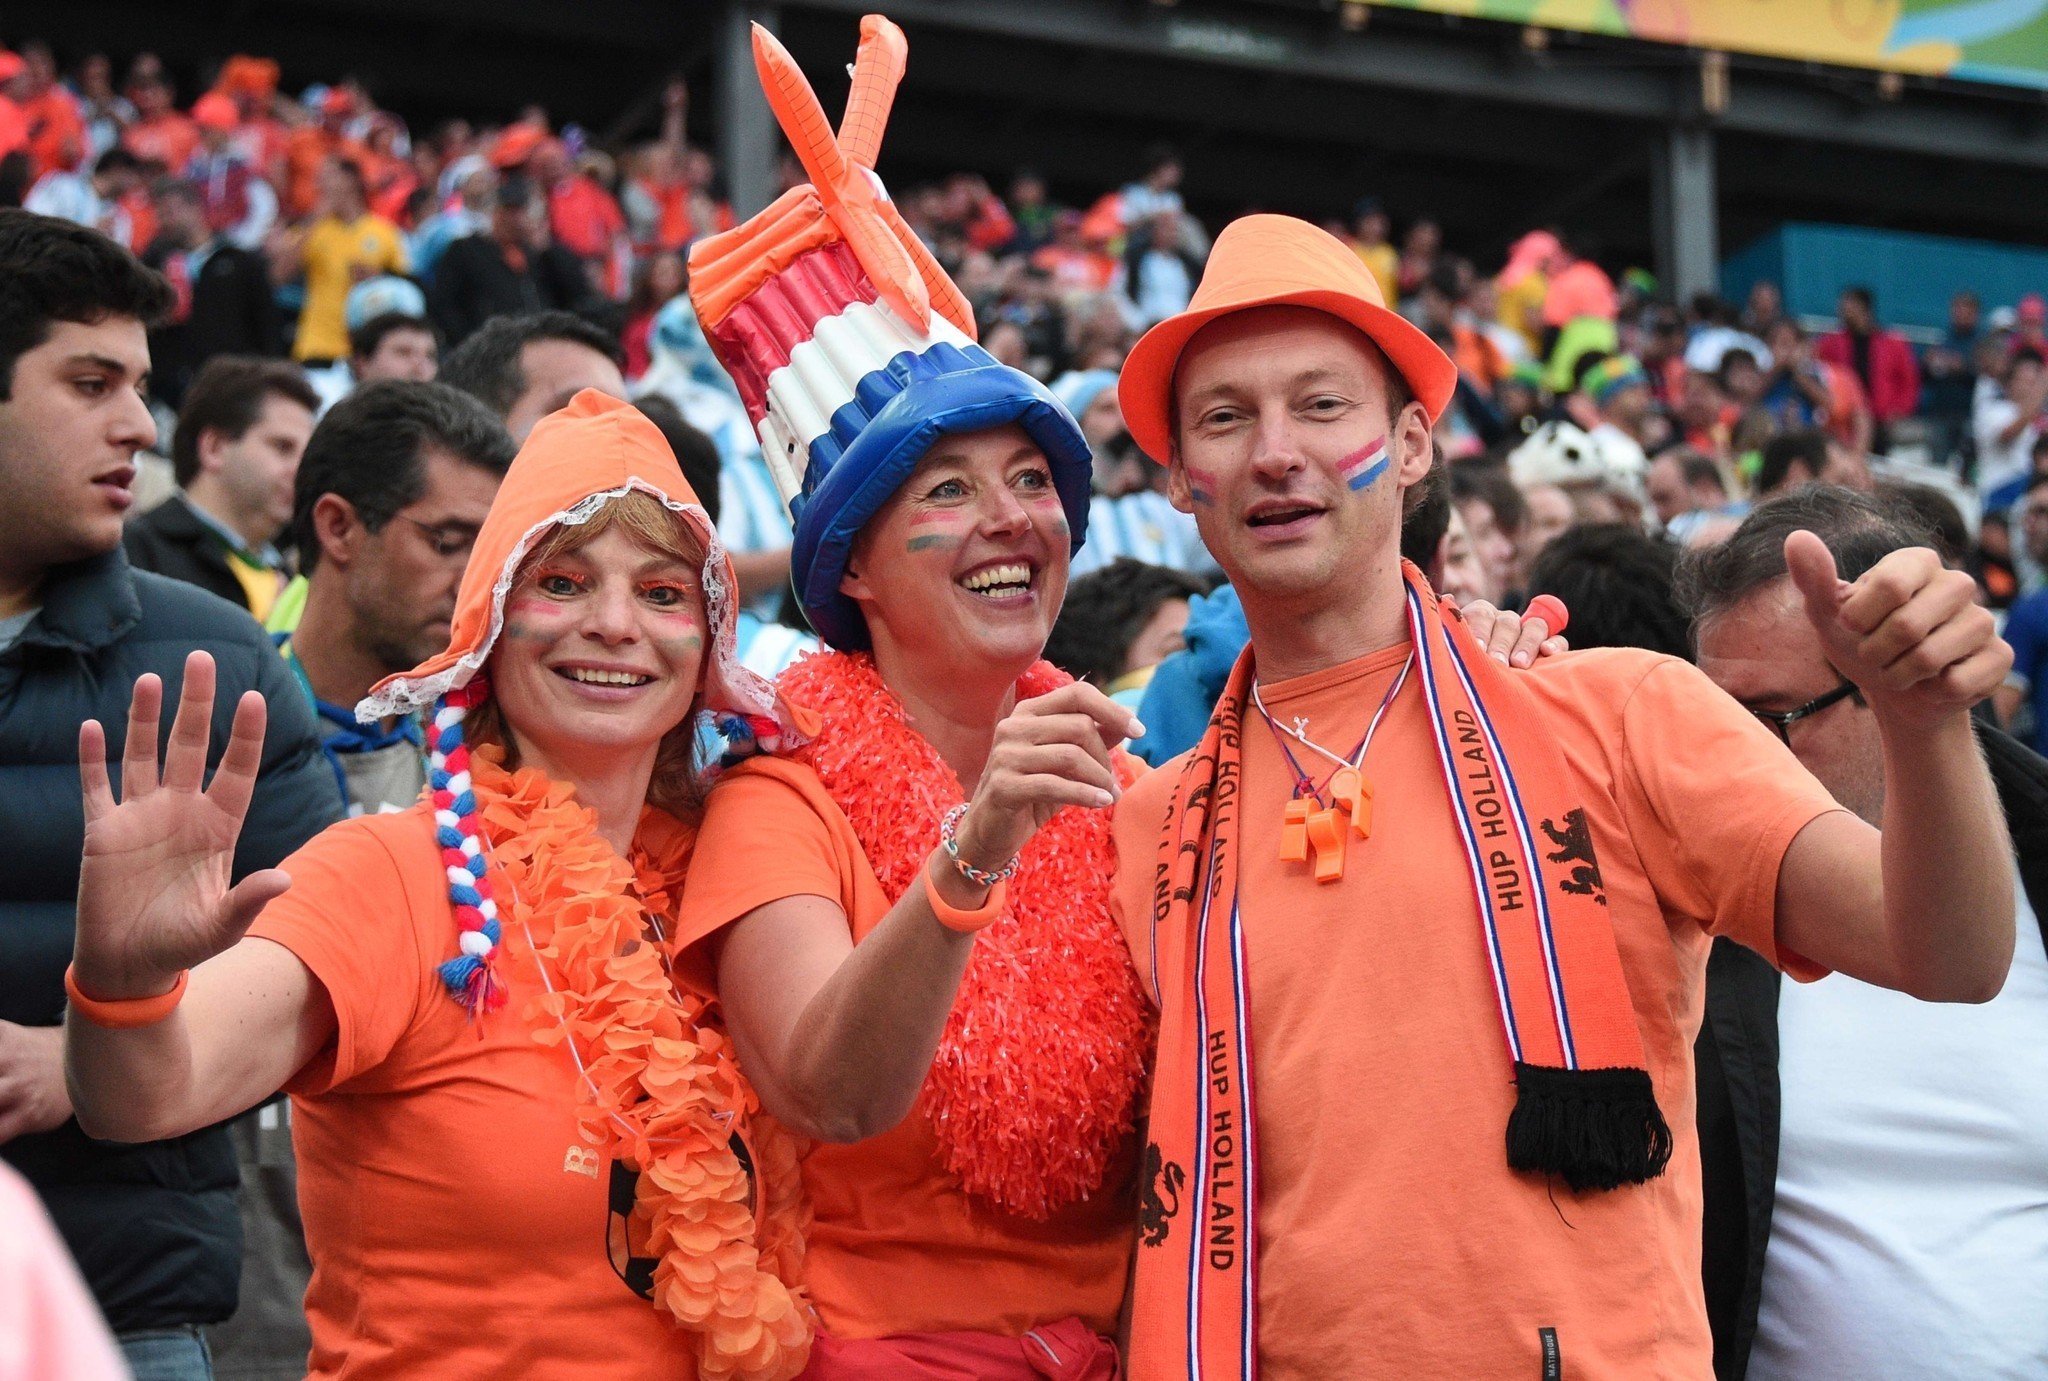 Pictures: Fans at the 2014 World Cup - Orlando Sentinel